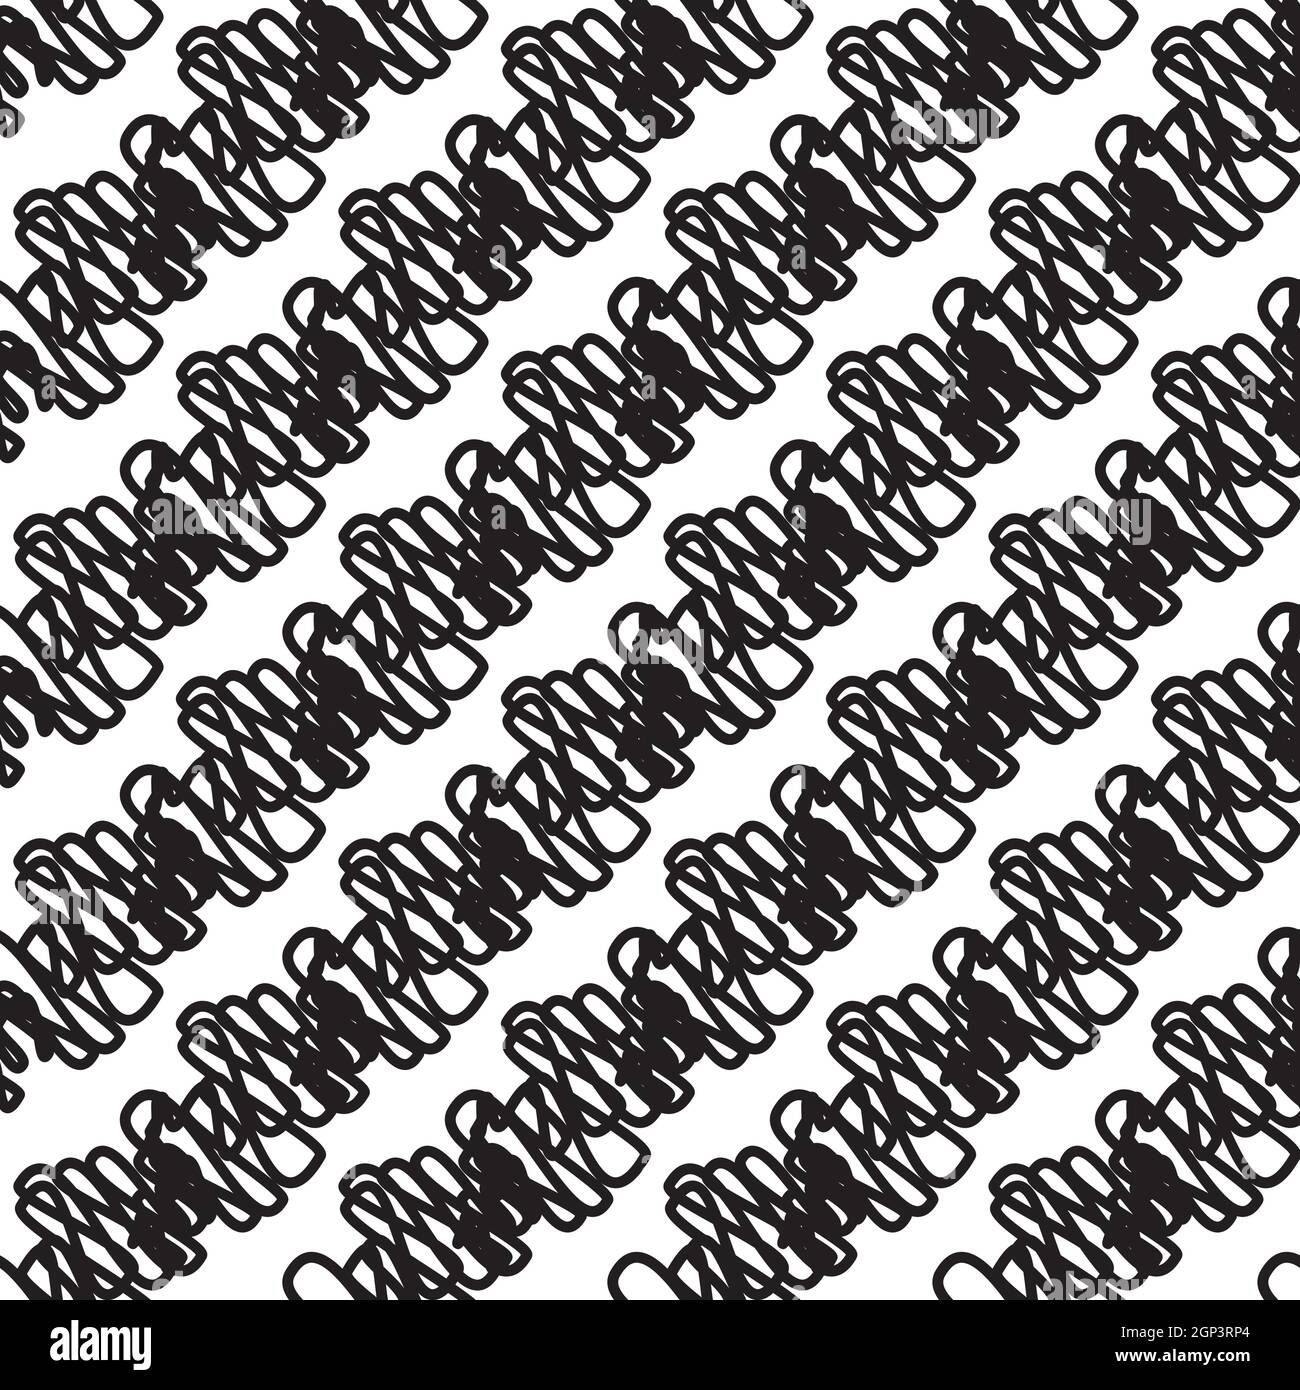 Abstract scalloped ribbon yarn effect seamless vector pattern background. Geometric black and white backdrop with diagonal scribbled doodle stripes Stock Vector